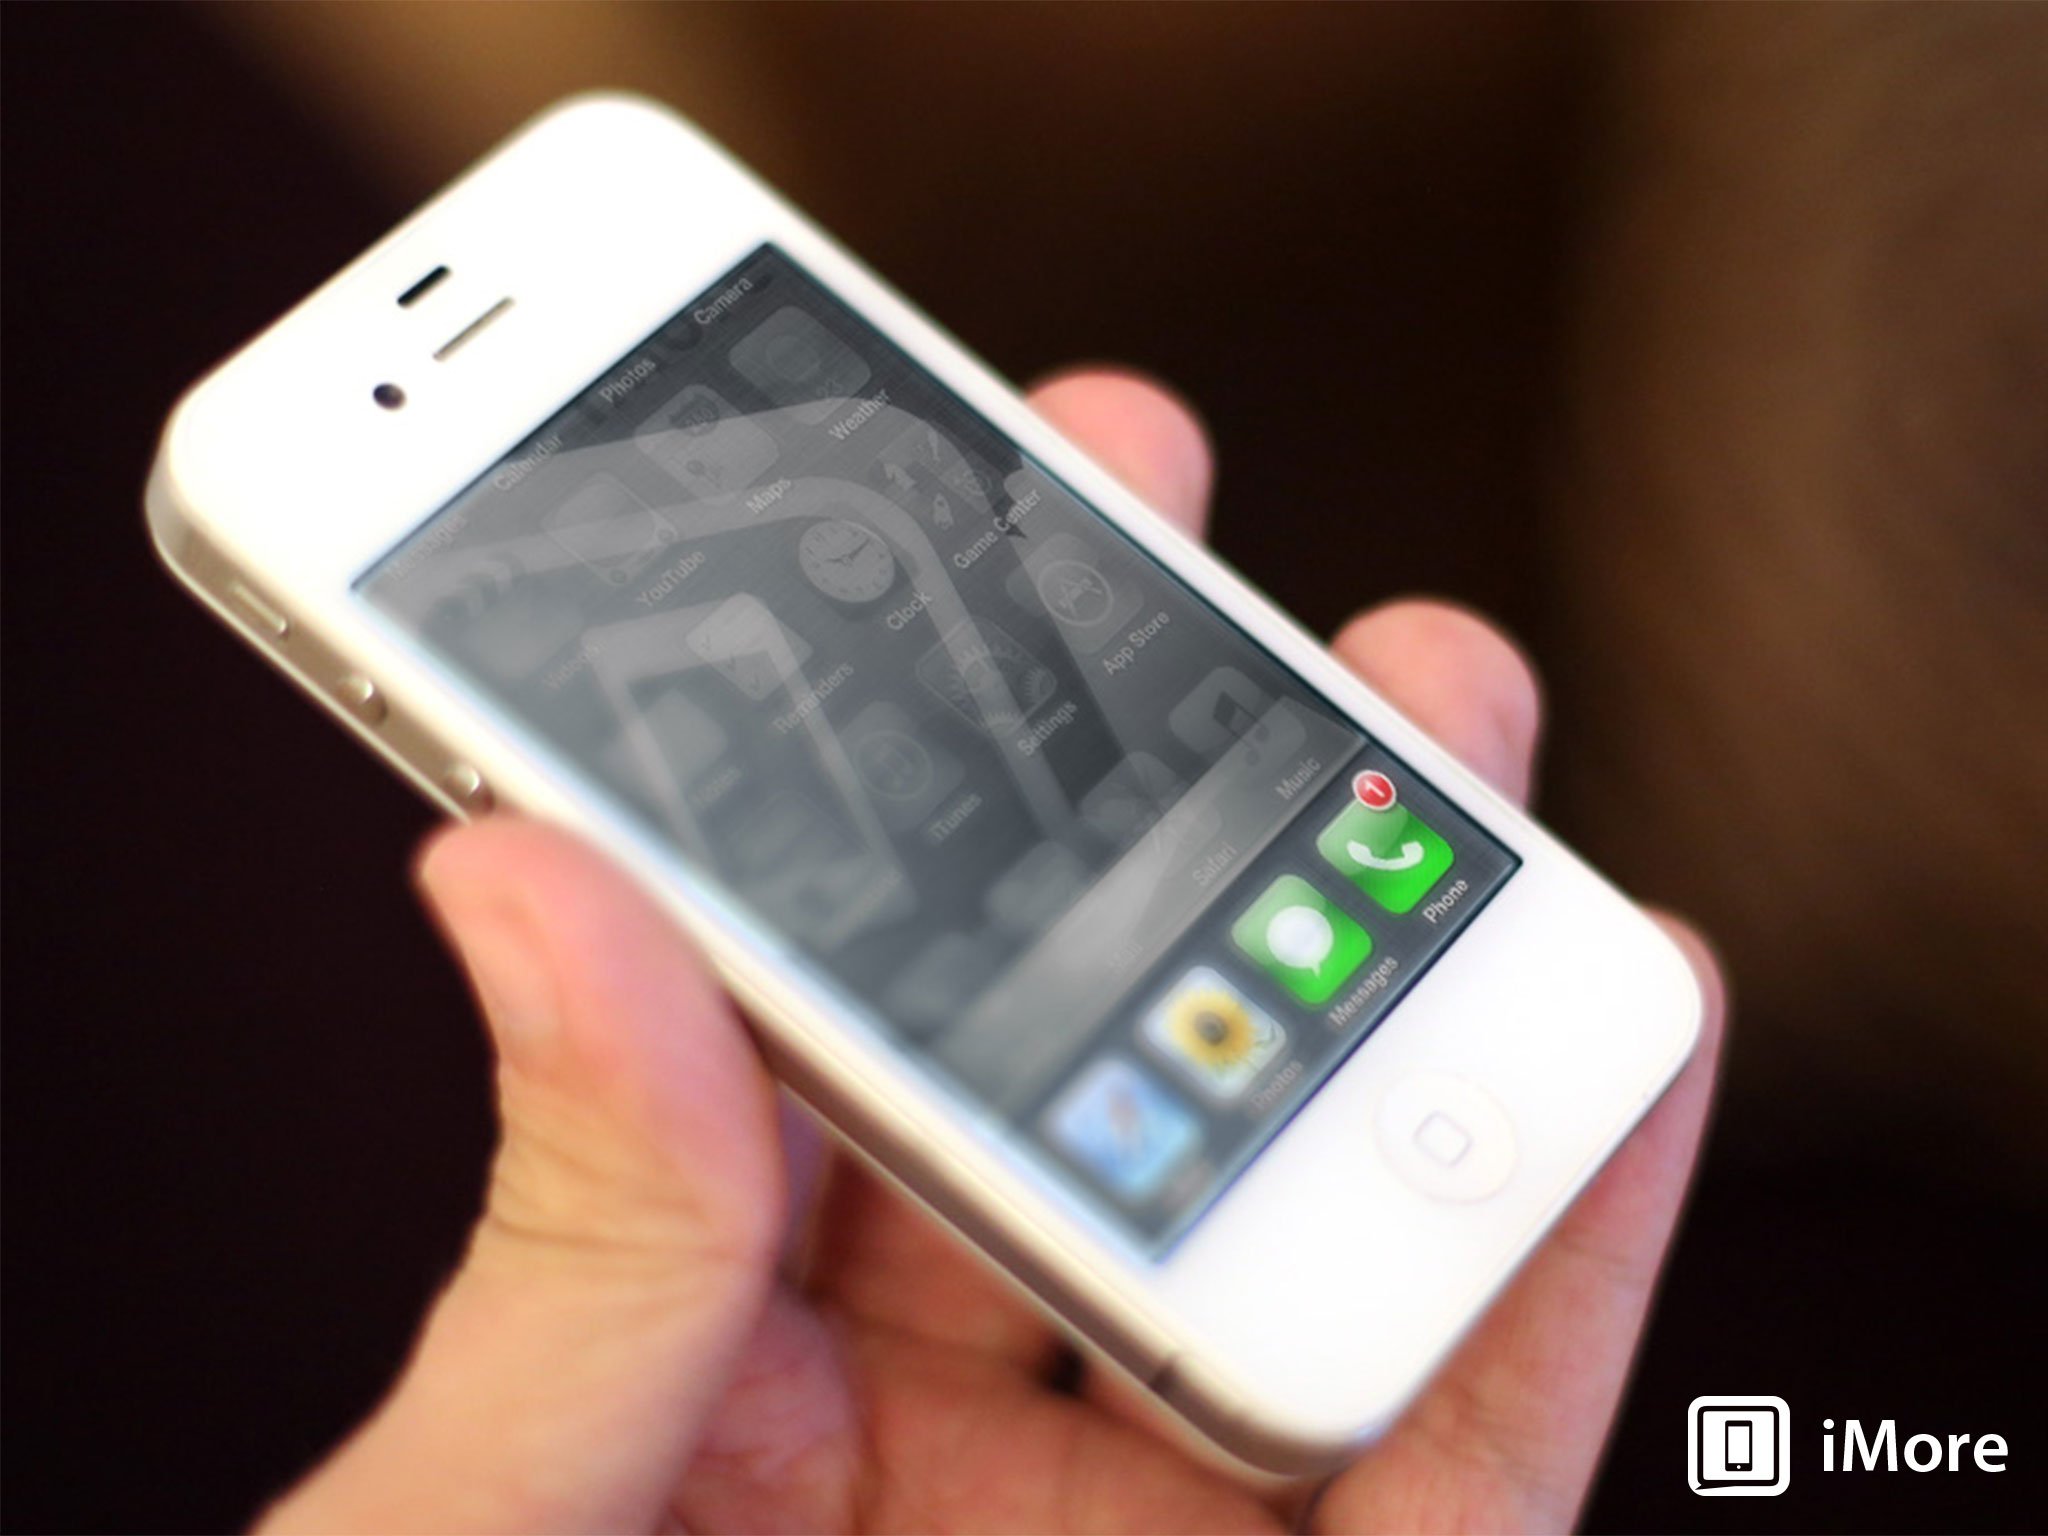 Complete review of Apple's iOS 4.1 software for iPhone and iPod touch